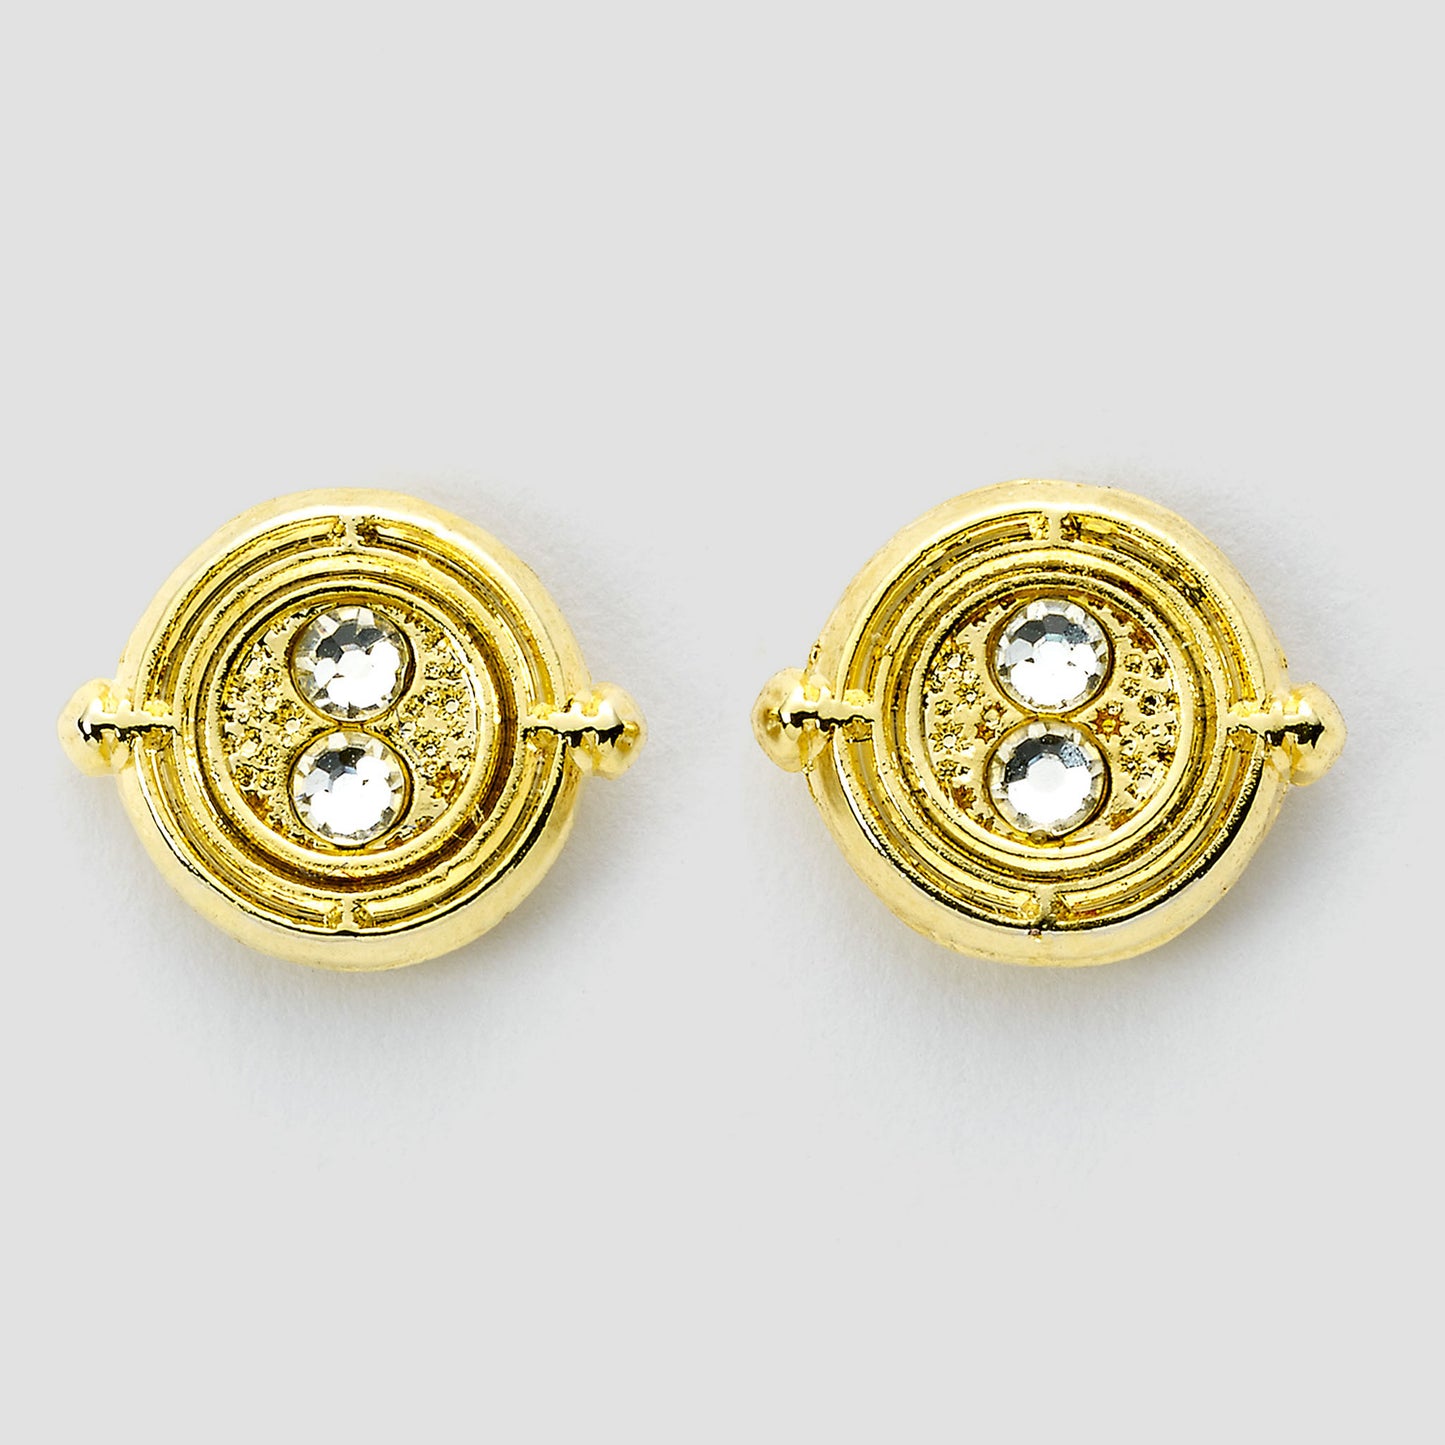 Time Turner (Harry Potter) Gold Plated Stud Earrings